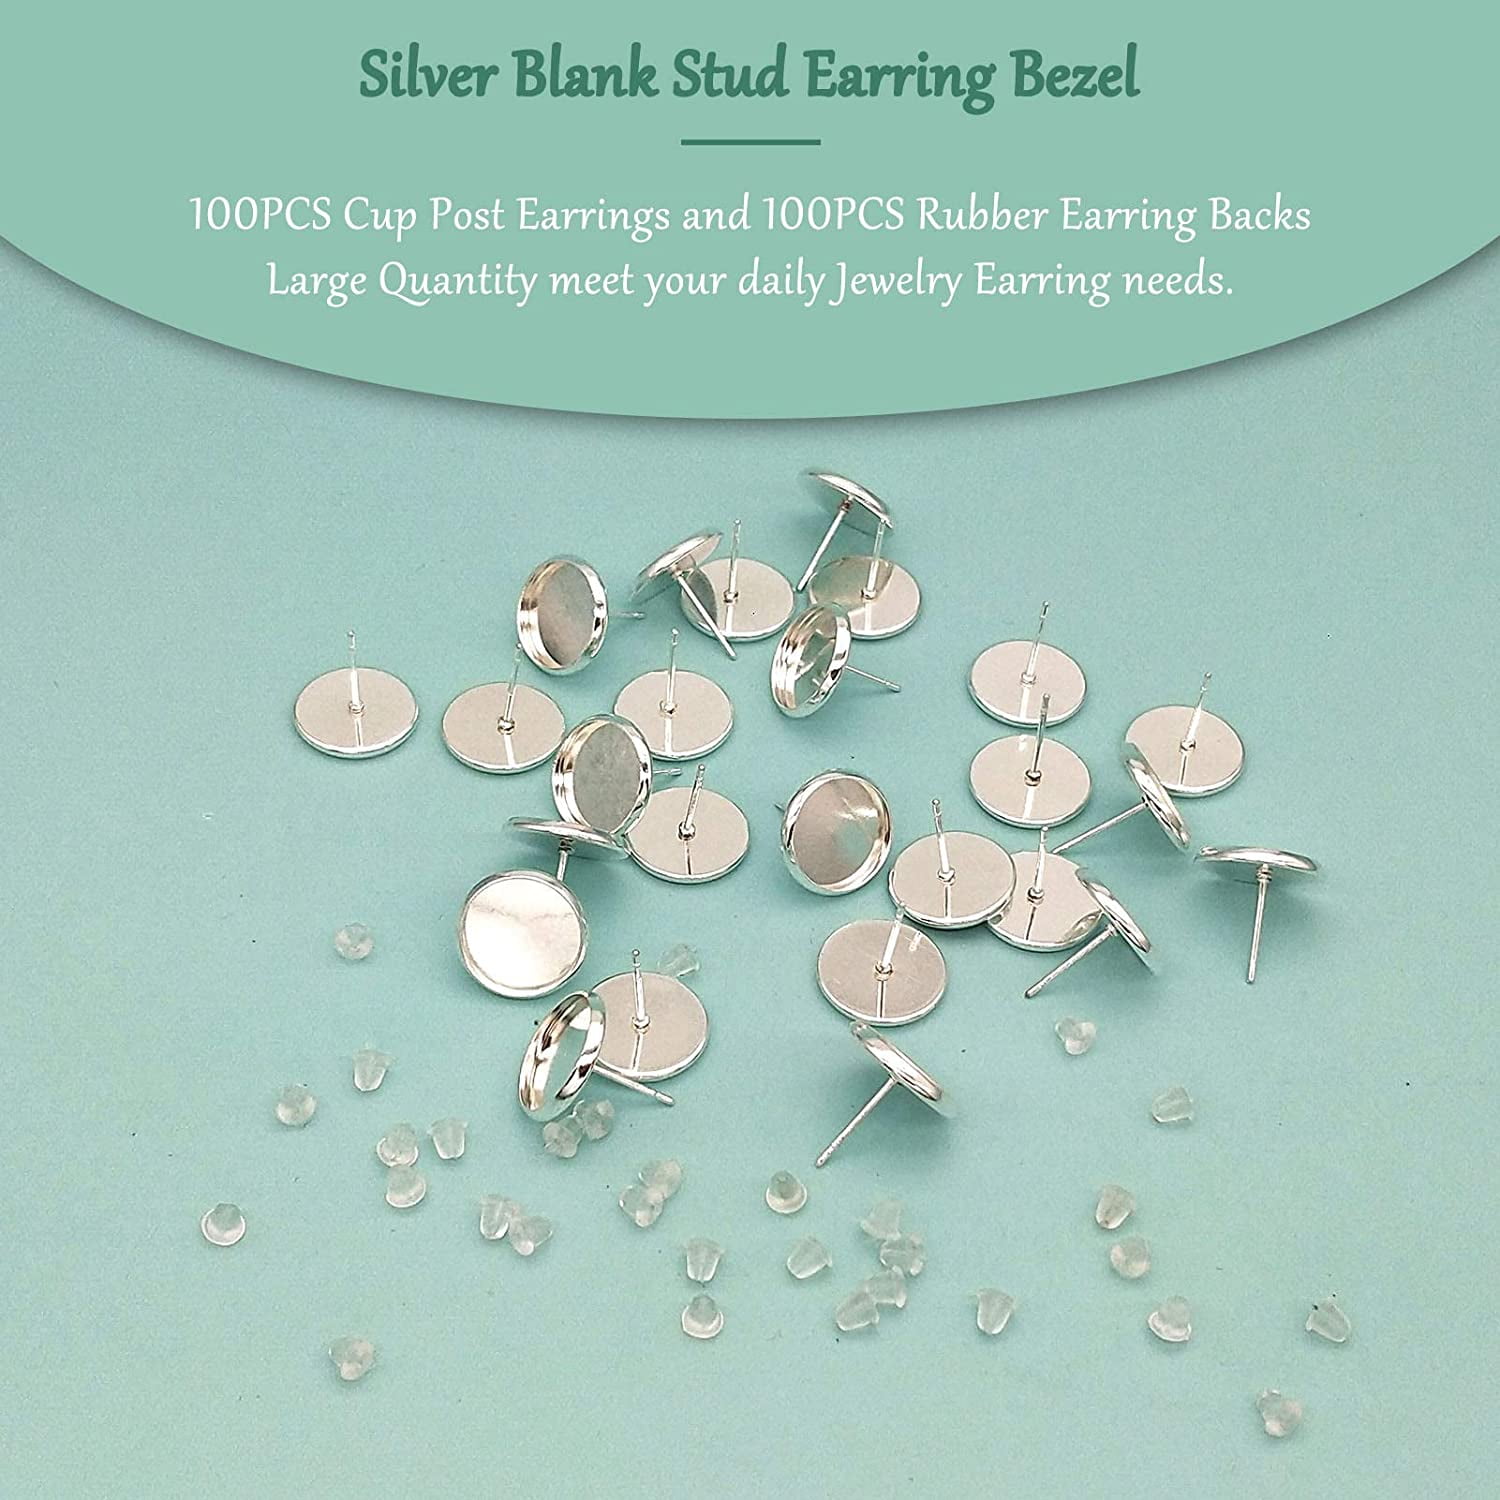 50 Pairs 5mm 8mm Blank Bezel Tray Stainless Steel Flatback Post Earring  Studs with Safety Earring Backs for Earring Making (DIY-FW0001-02)